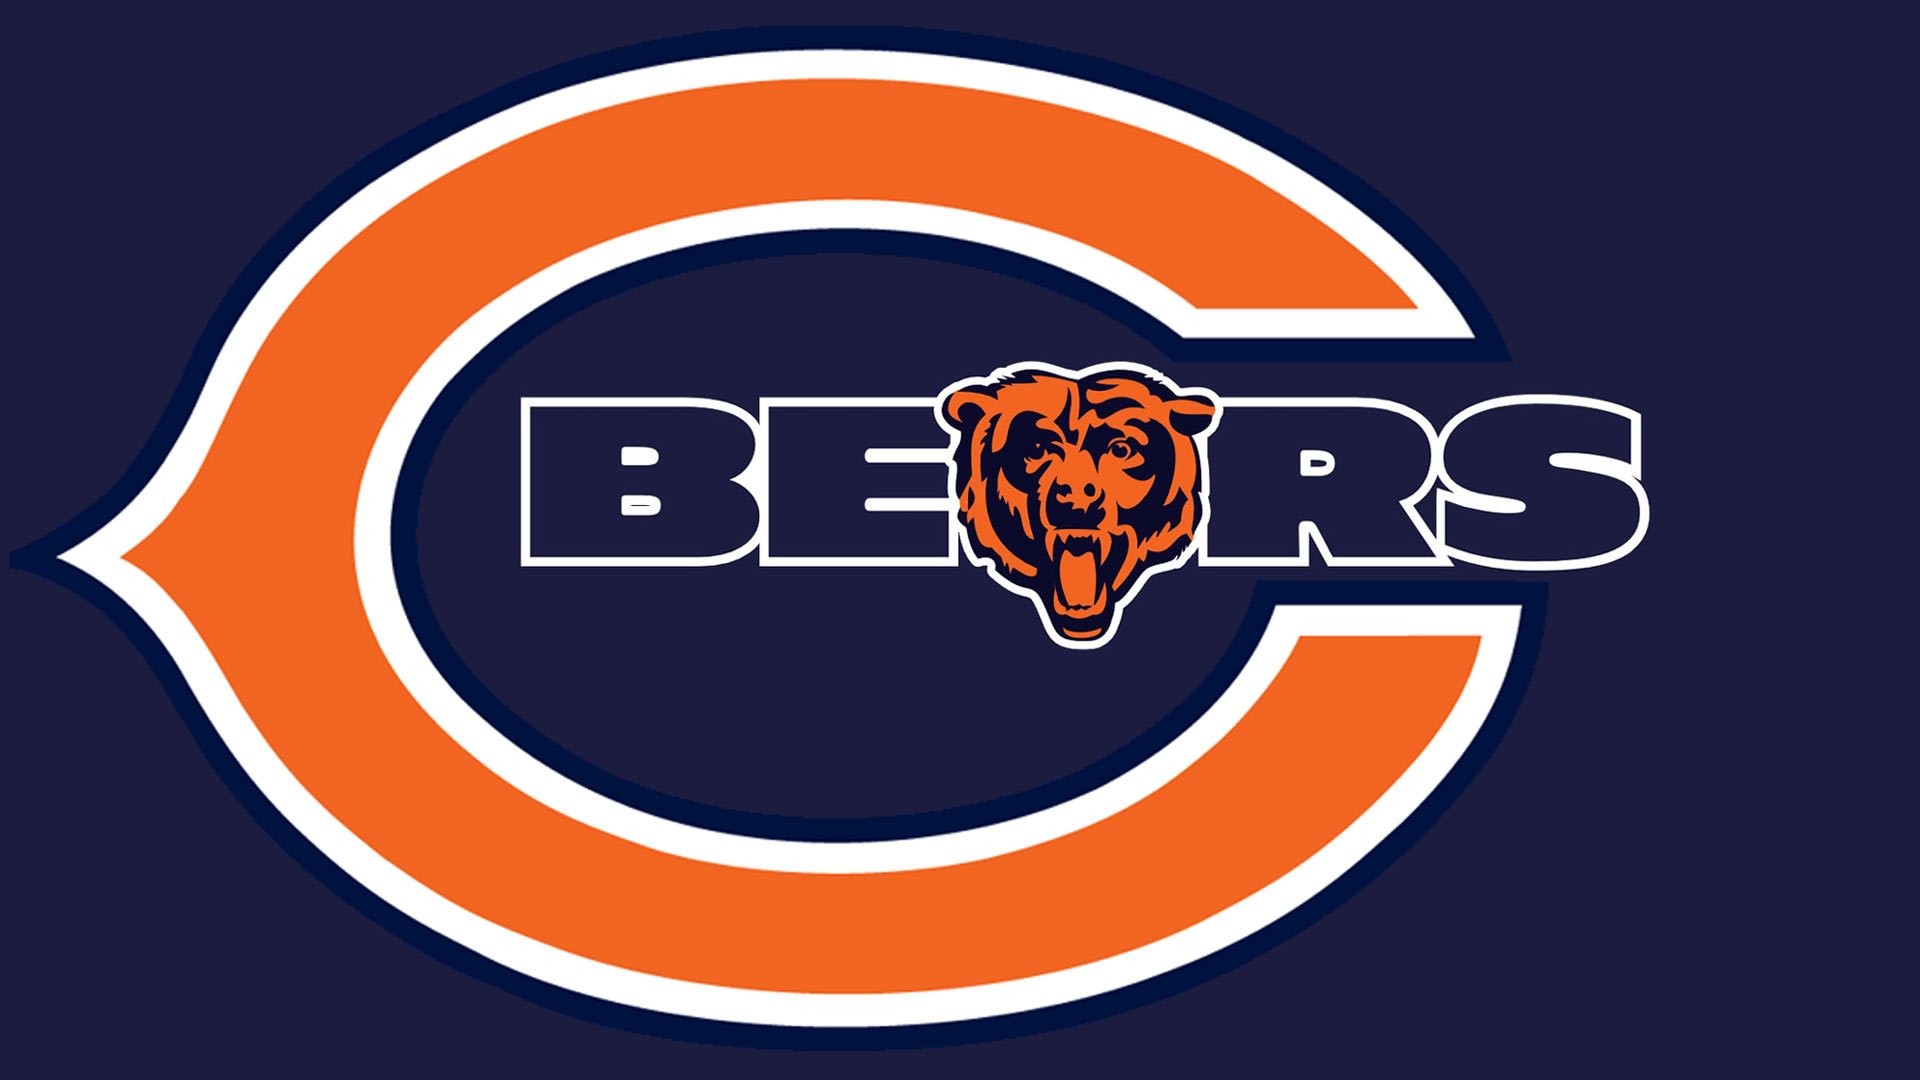 1920x1080 ... Perfect Chicago Bears Logos Wallpaper Free Wallpaper For Desktop and  Mobile in All Resolutions Free Download